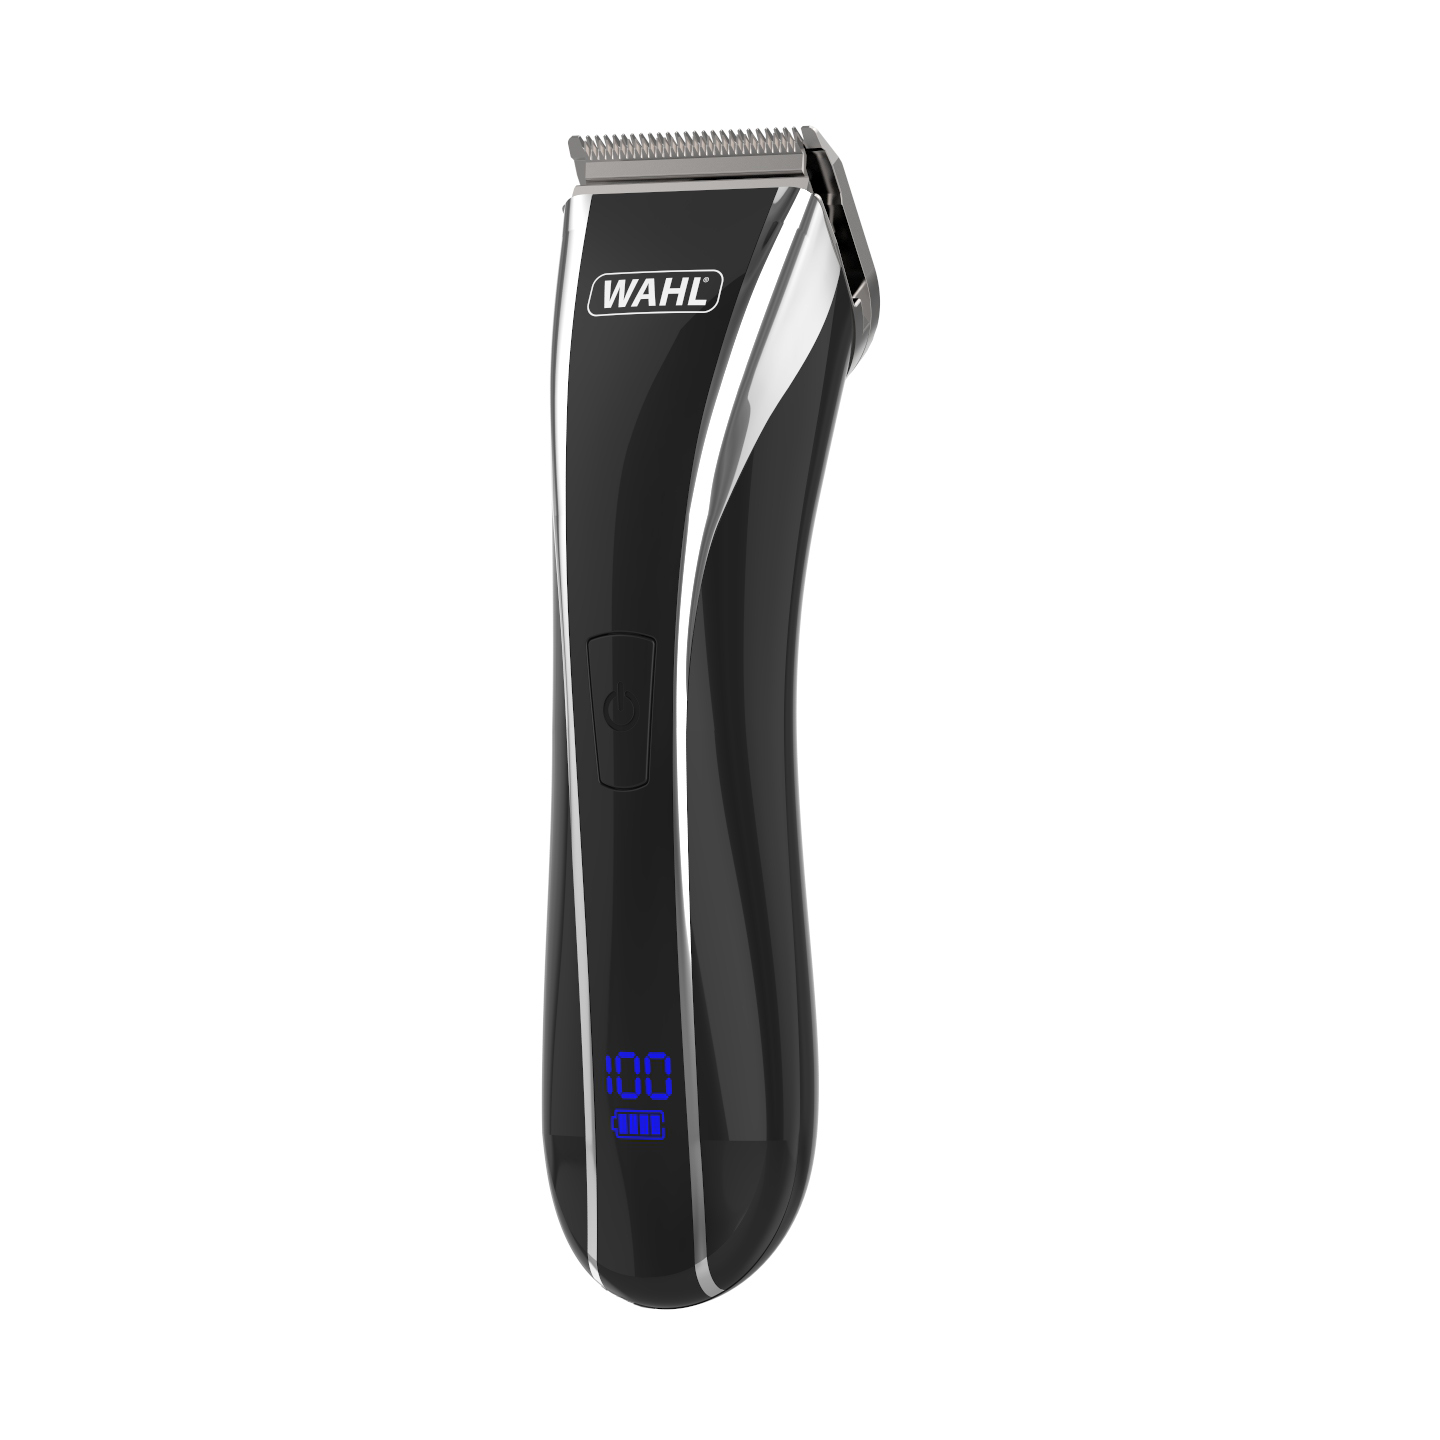 wahl ultimate clipper